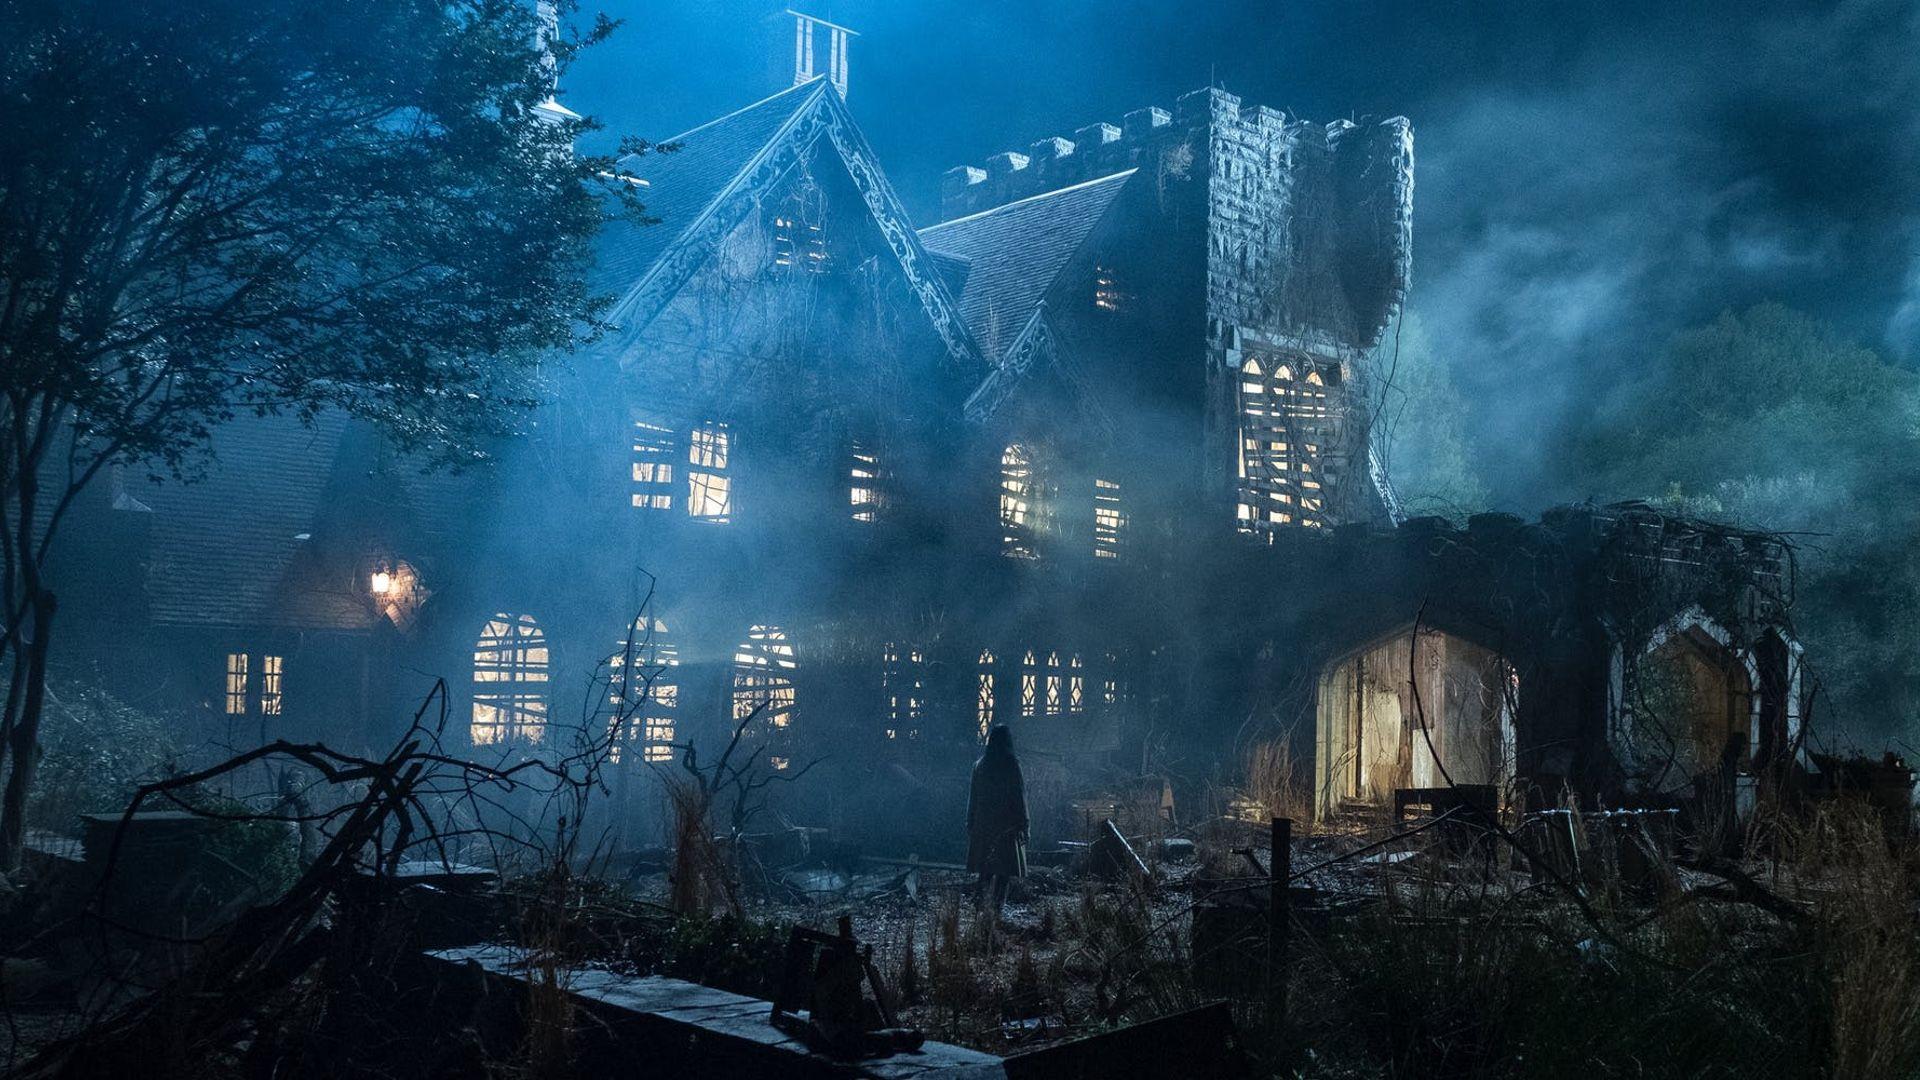 Review: THE HAUNTING OF HILL HOUSE is a Beautifully Made Terrifying